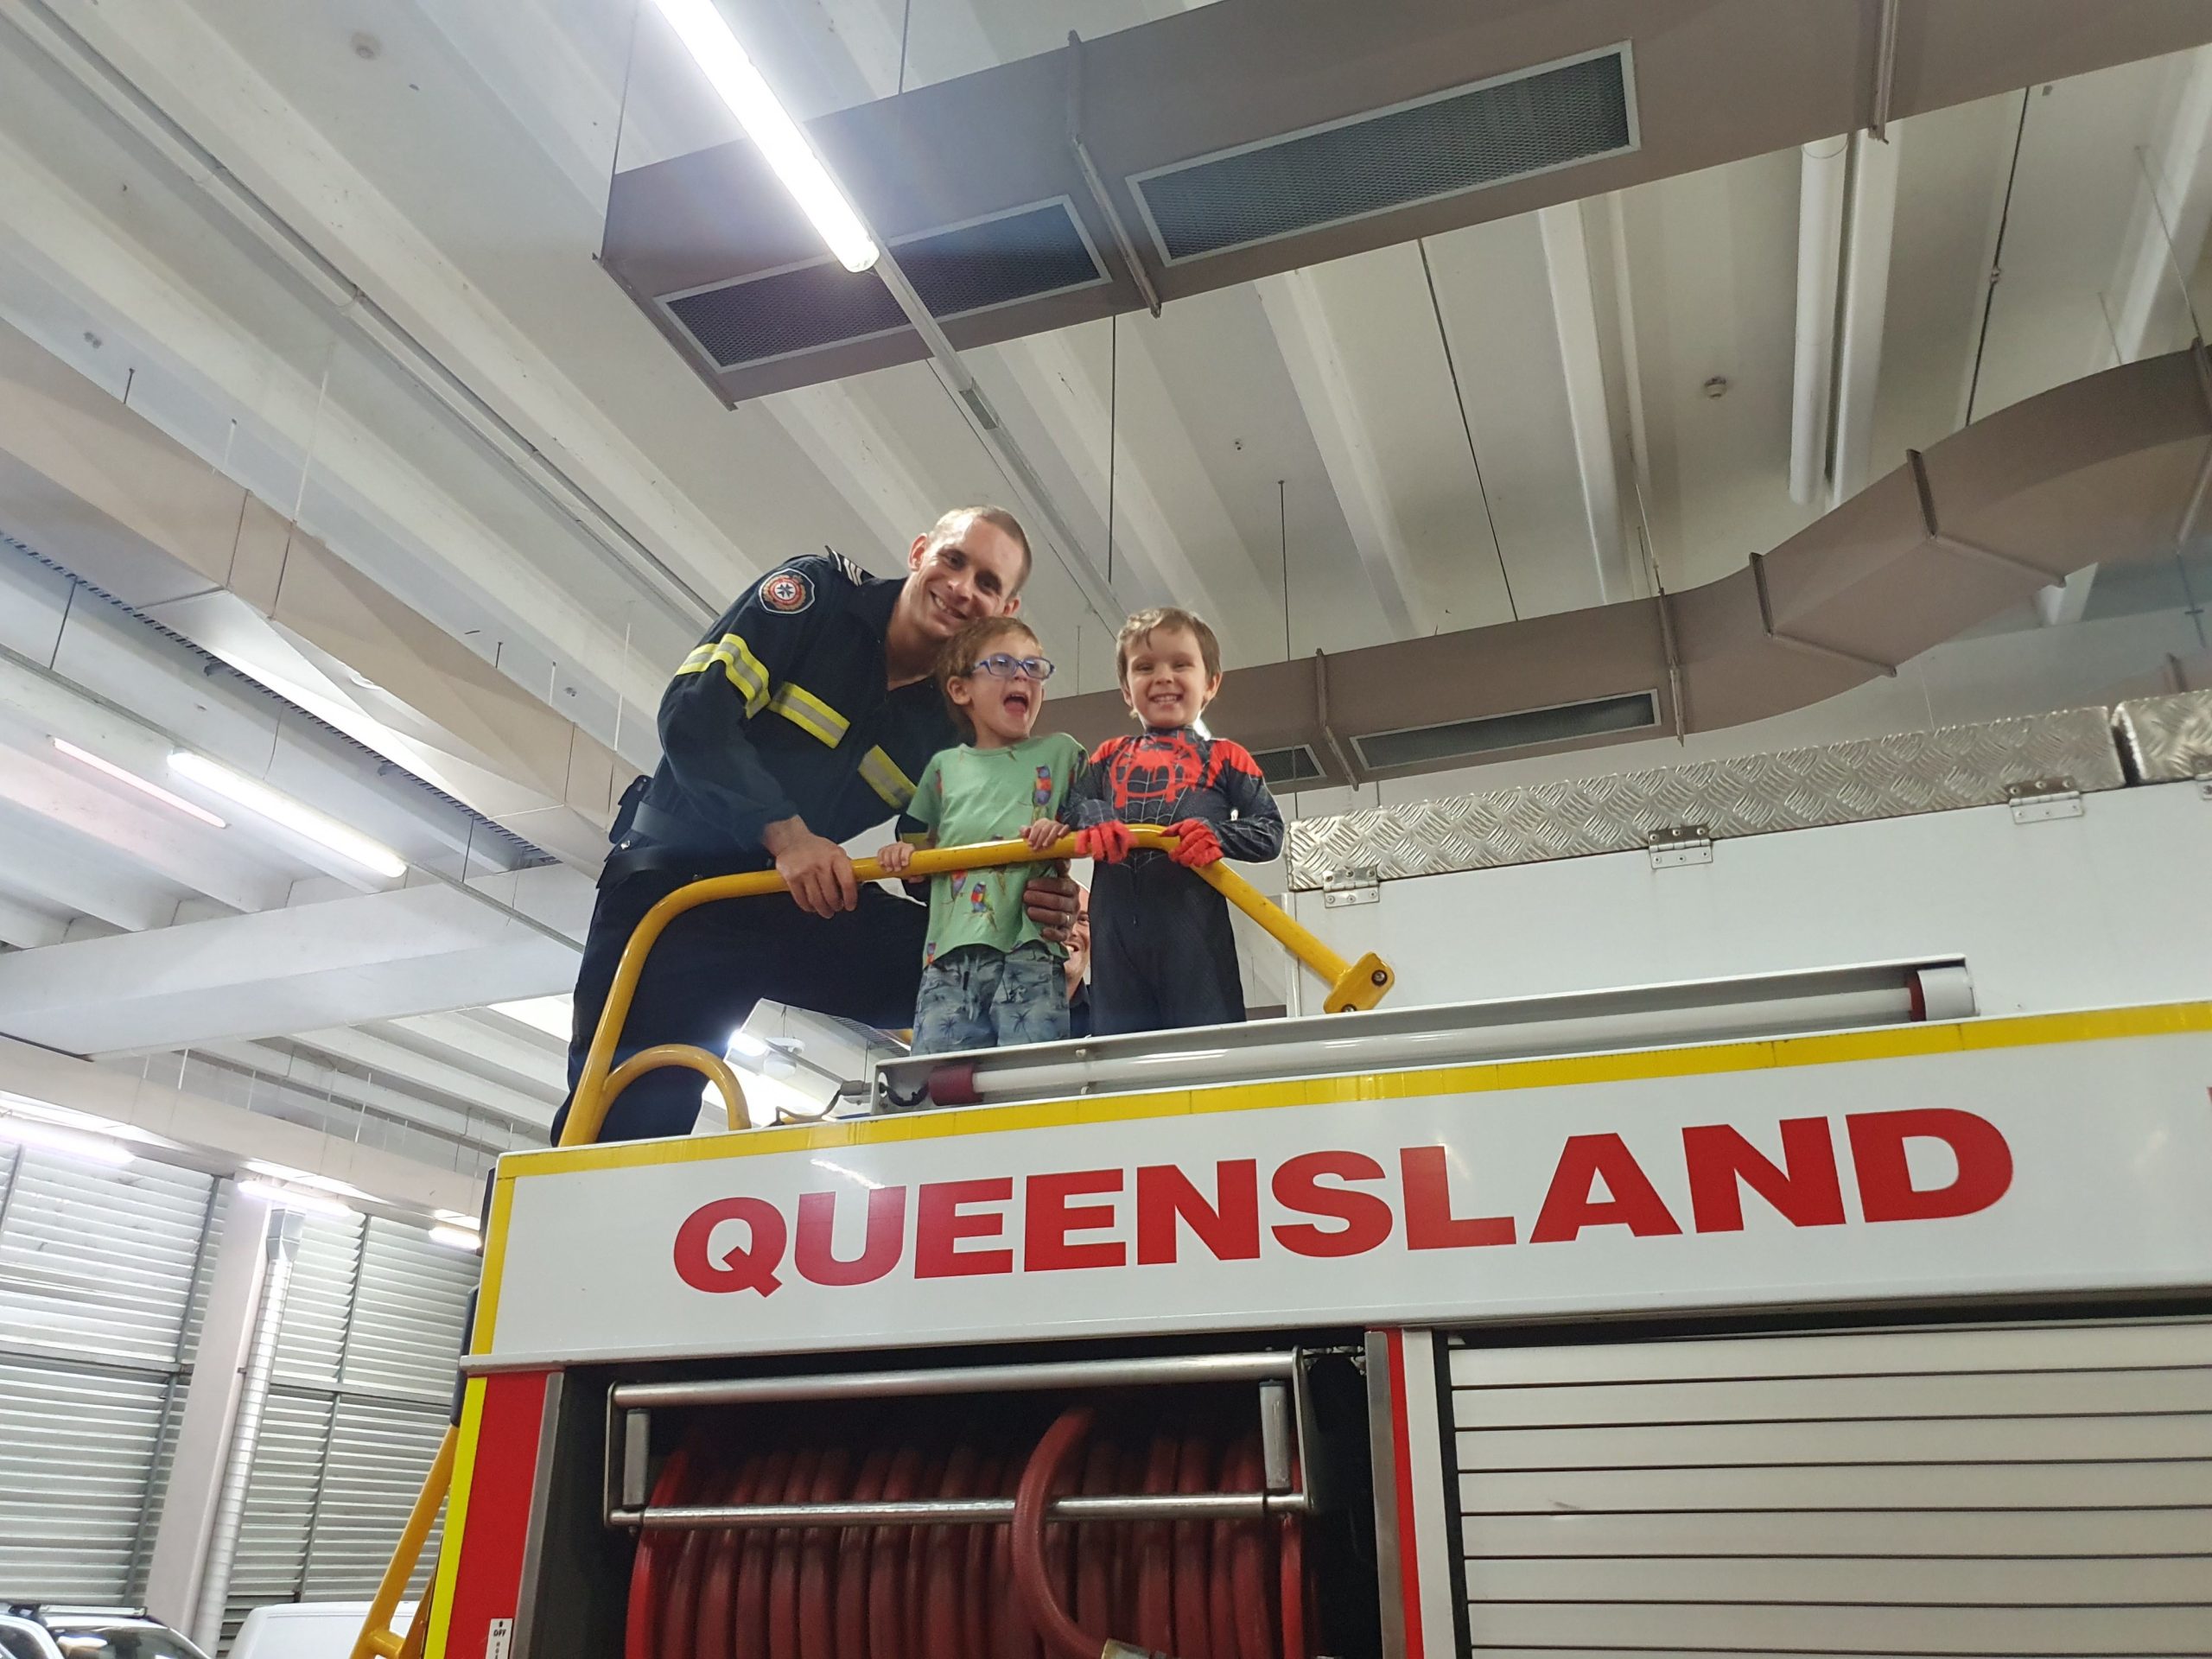 blair on top of a firetruck with his two boys